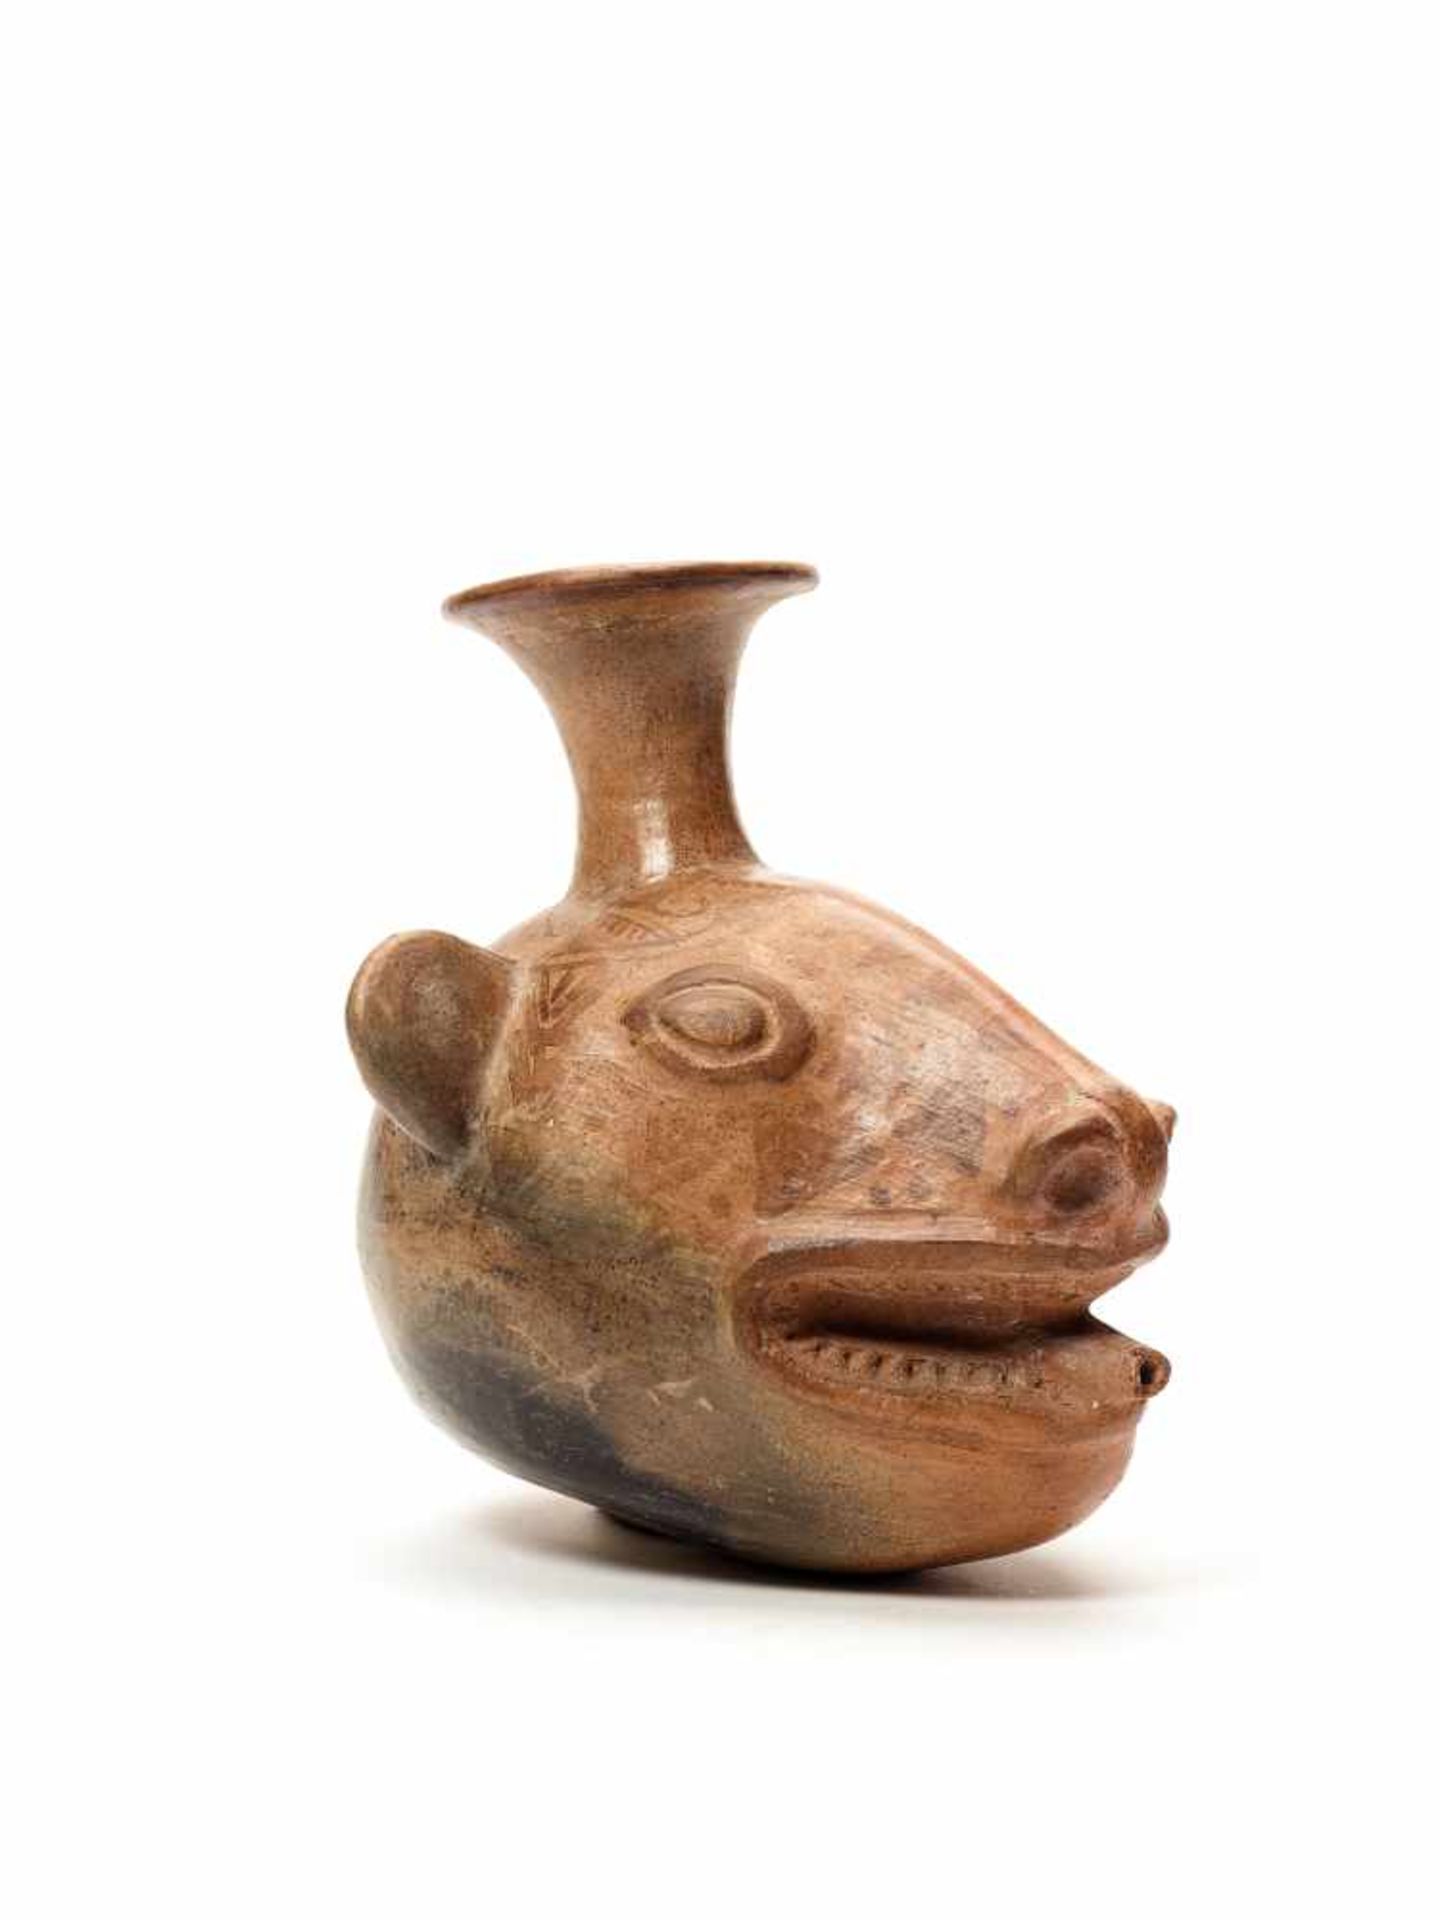 PACCHA IN THE FORM OF A LAMA HEAD – INCA EMPIRE, PERU, C. 1200-1400 ADPainted fired clayInca empire, - Image 3 of 4